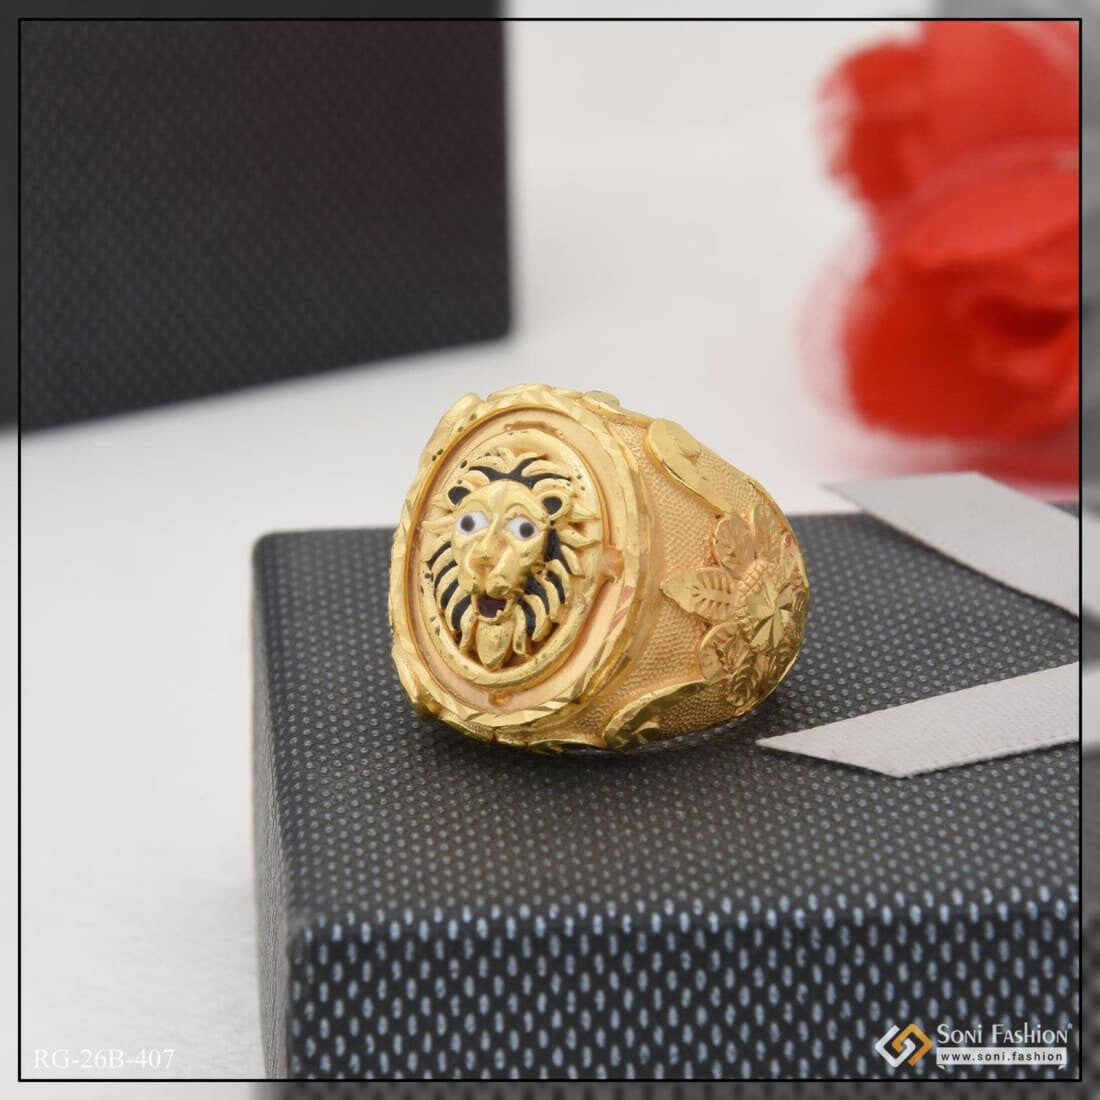 Konstantino Greek Myth Lion Head Ring in Silver and Gold